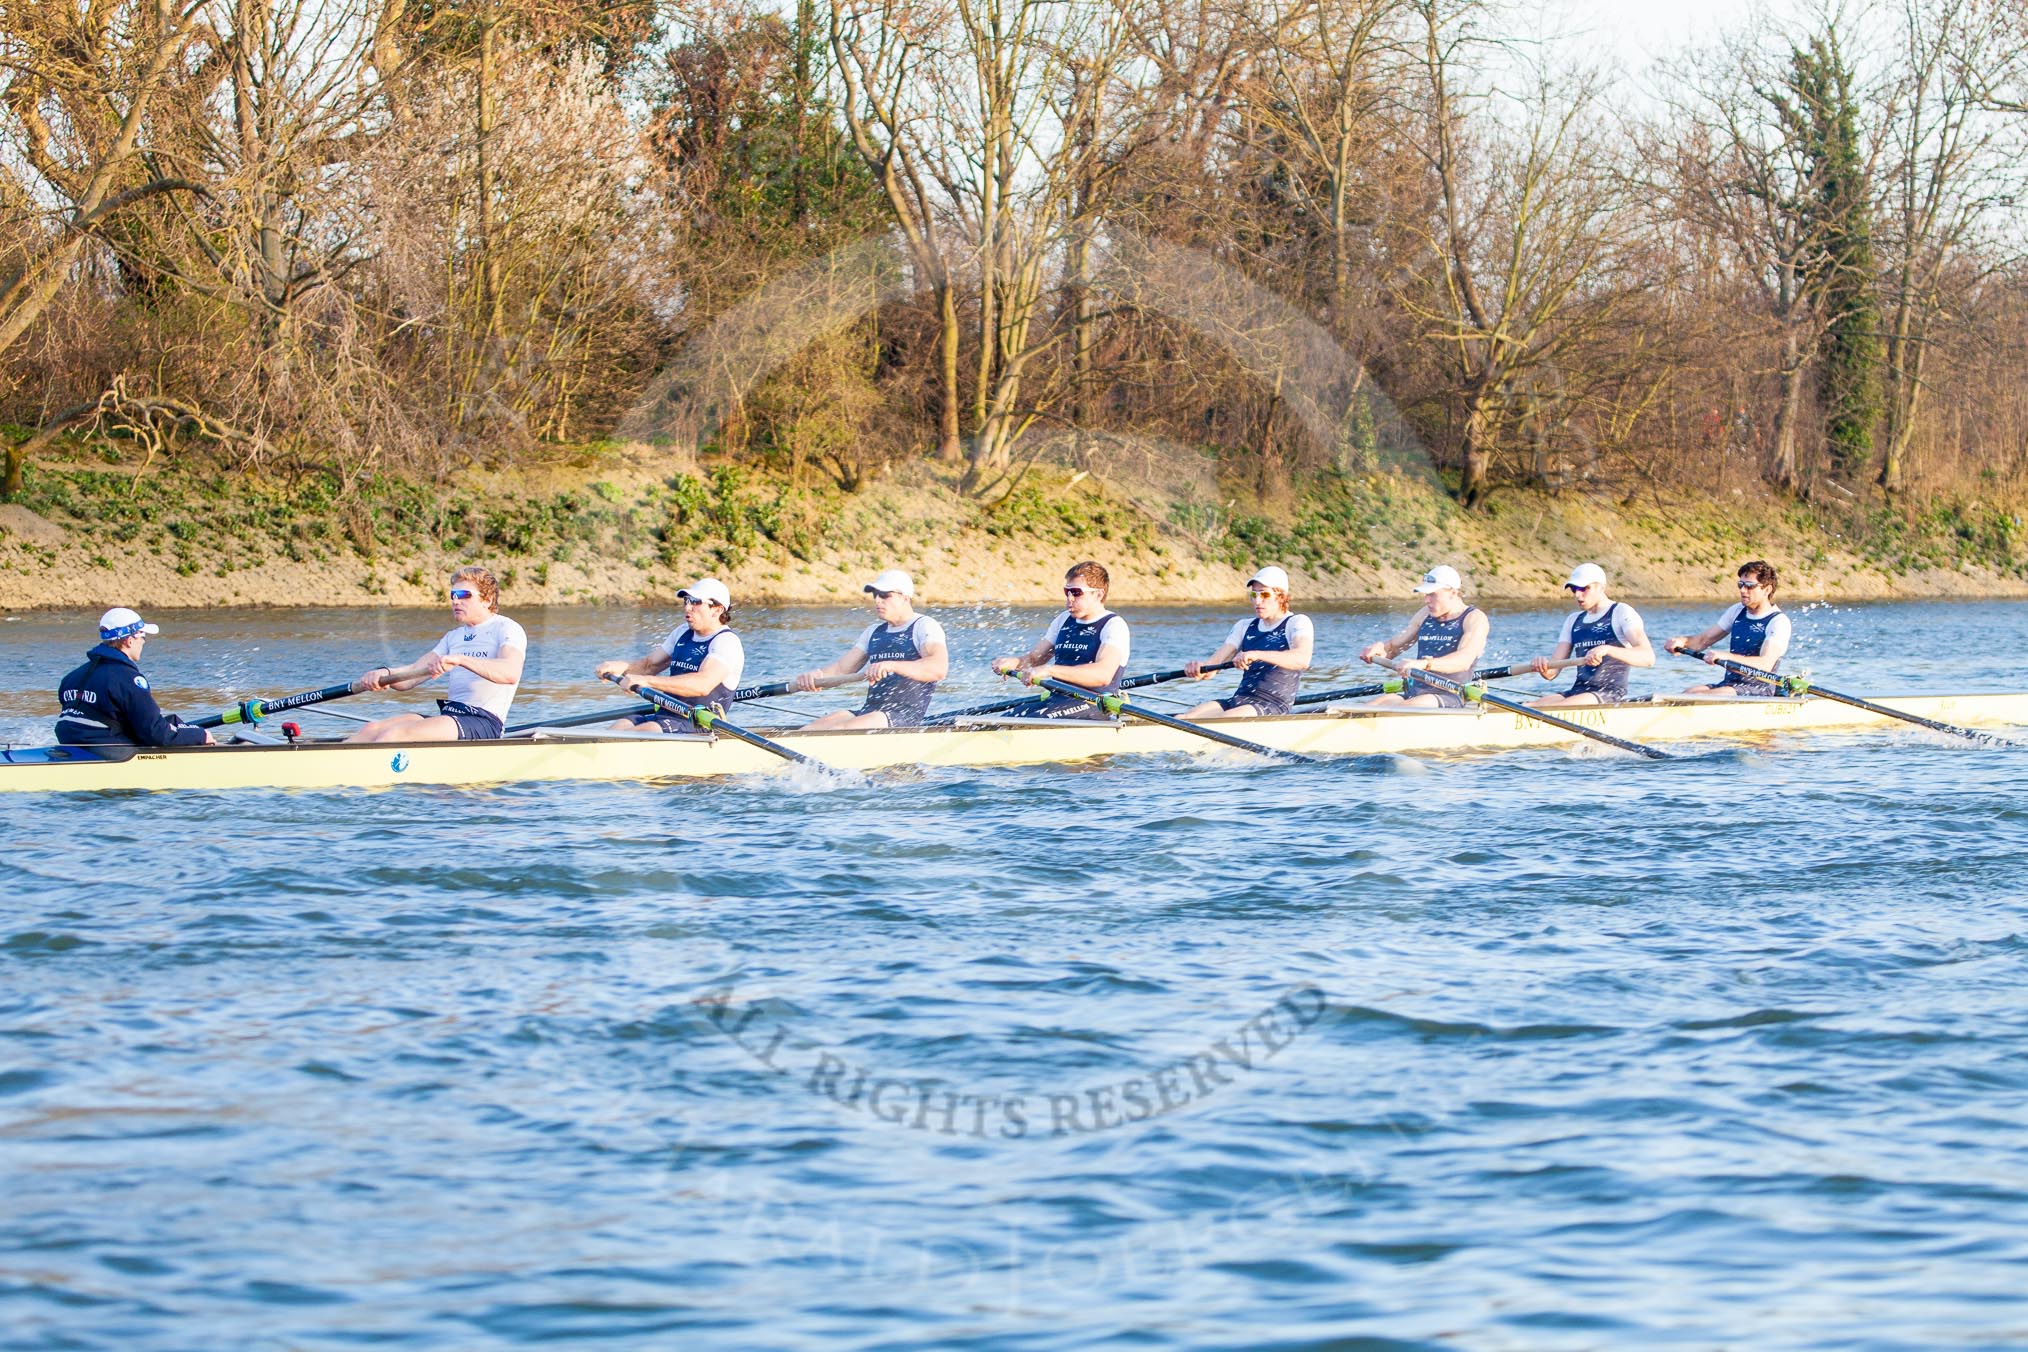 The Boat Race season 2014 - fixture OUBC vs German U23: The OUBC boat at the start of the second race..
River Thames between Putney Bridge and Chiswick Bridge,



on 08 March 2014 at 17:04, image #213